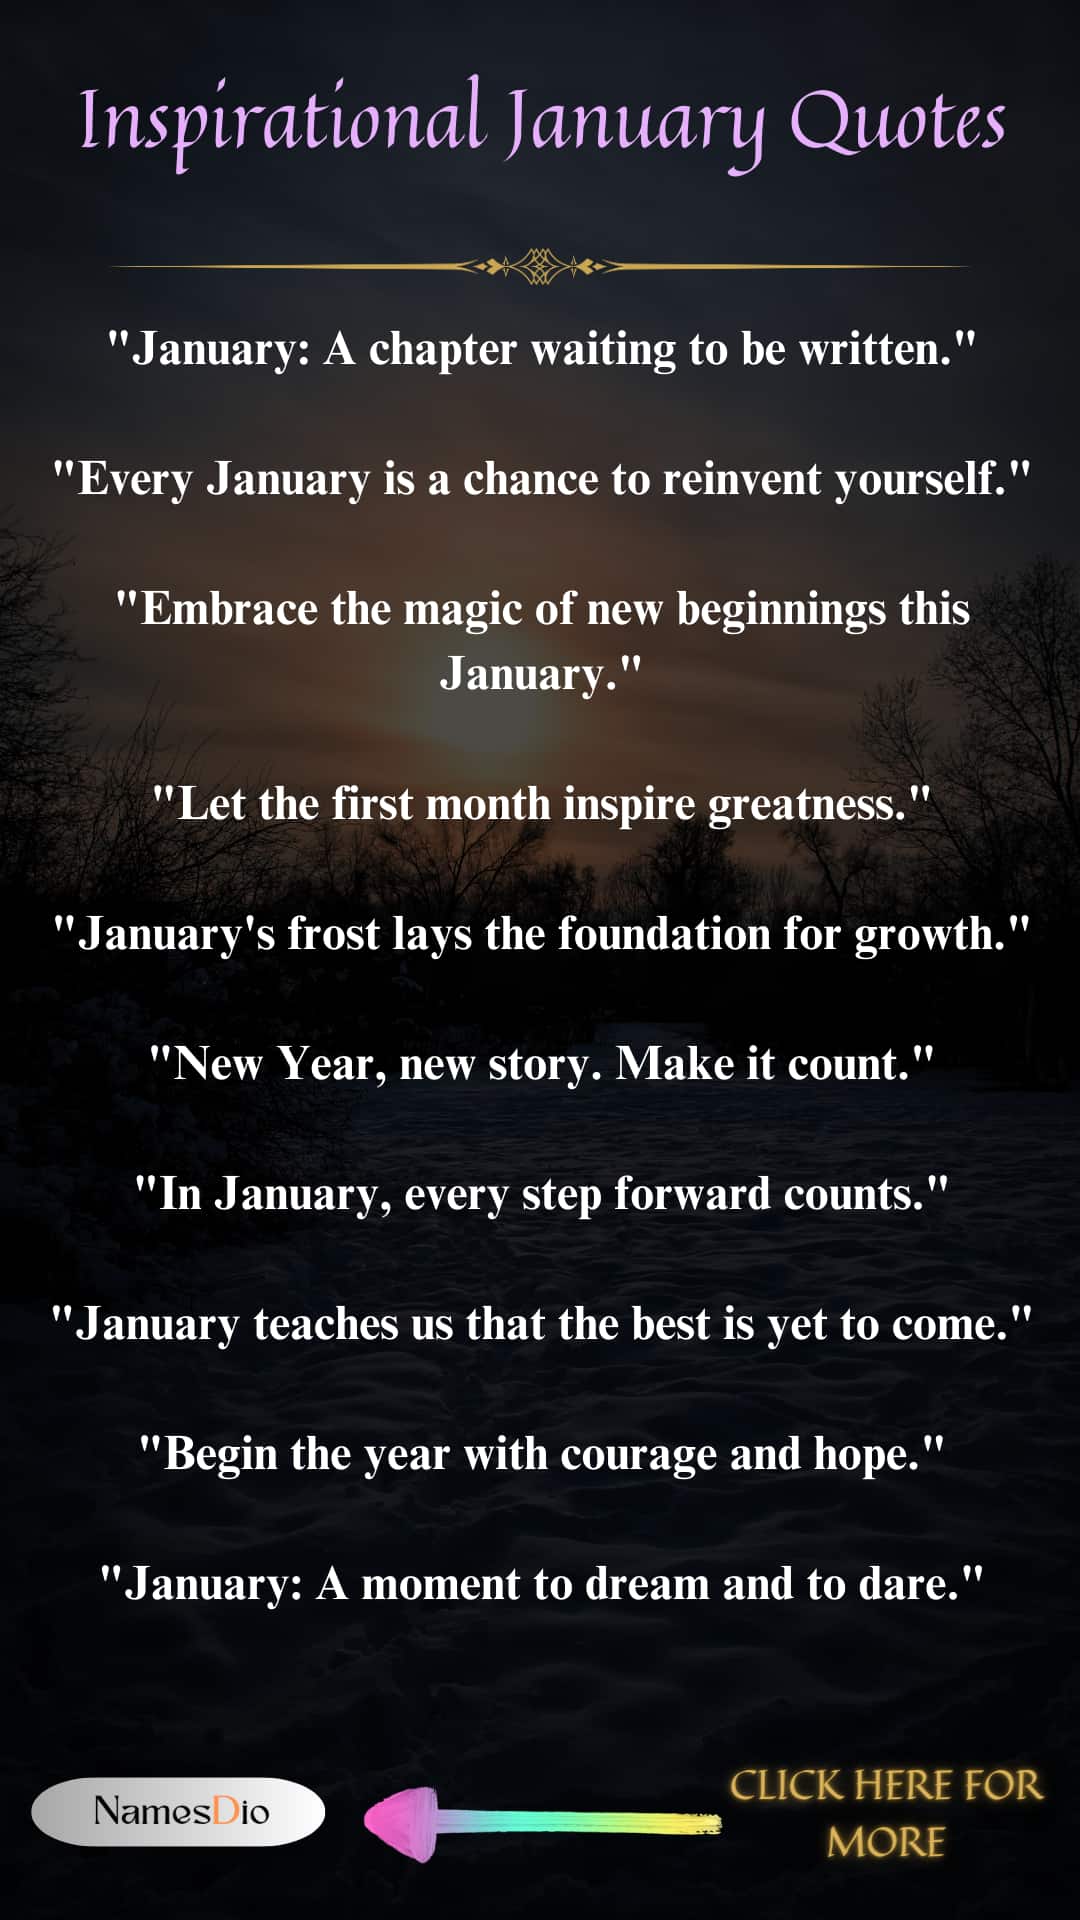 Inspirational-January-Quotes